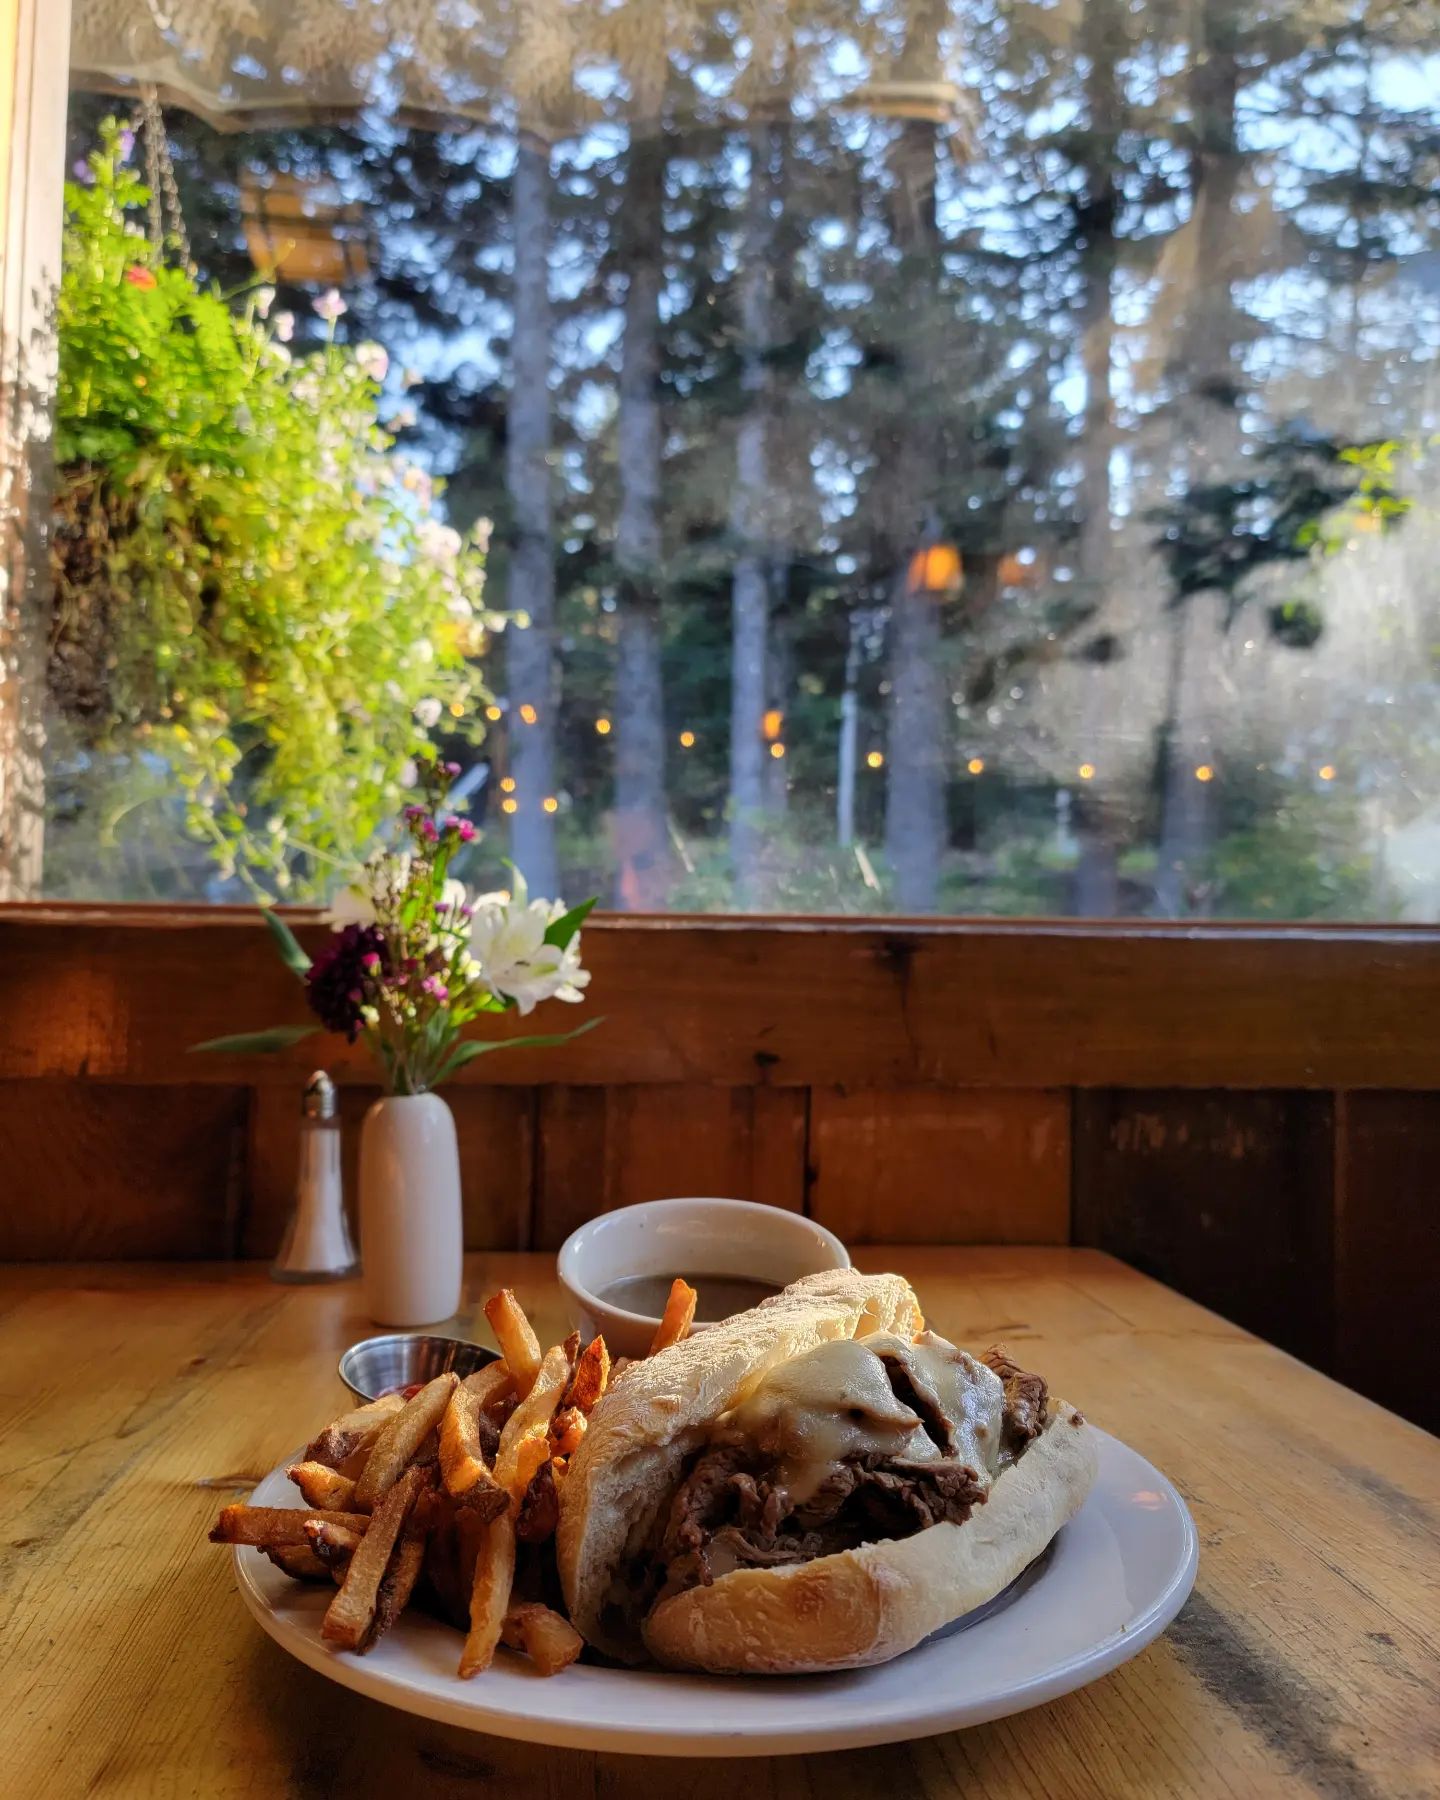 A delicious looking sandwich and fries from the restaurant at Cooper Spur in a cozy restaurant setting